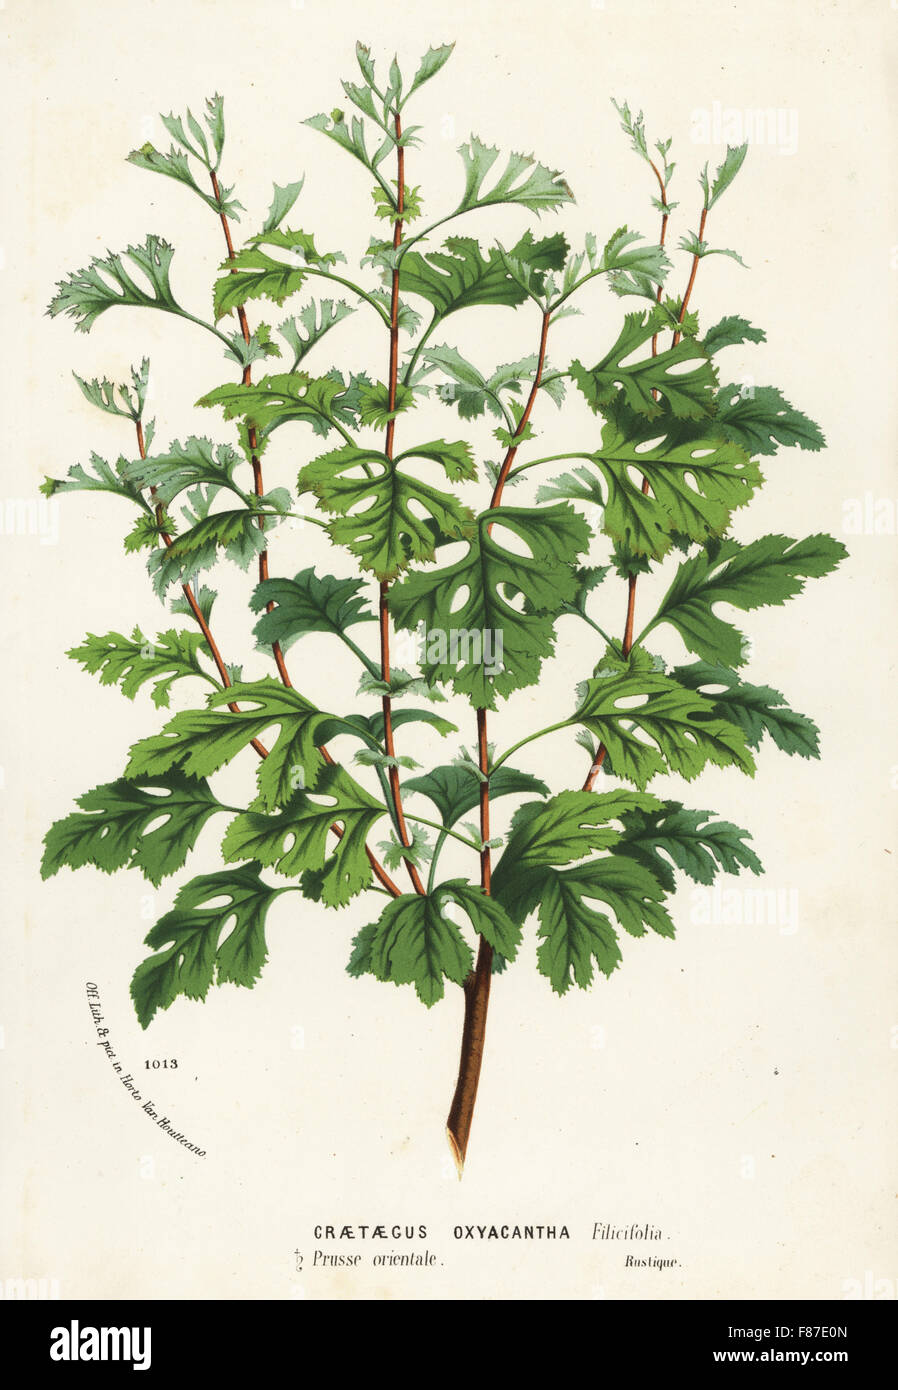 Hawthorn, Crataegus rhipidophylla (Craetaegus oxycantha filicifolia). Handcoloured lithograph from Louis van Houtte and Charles Lemaire's Flowers of the Gardens and Hothouses of Europe, Flore des Serres et des Jardins de l'Europe, Ghent, Belgium, 1874. Stock Photo